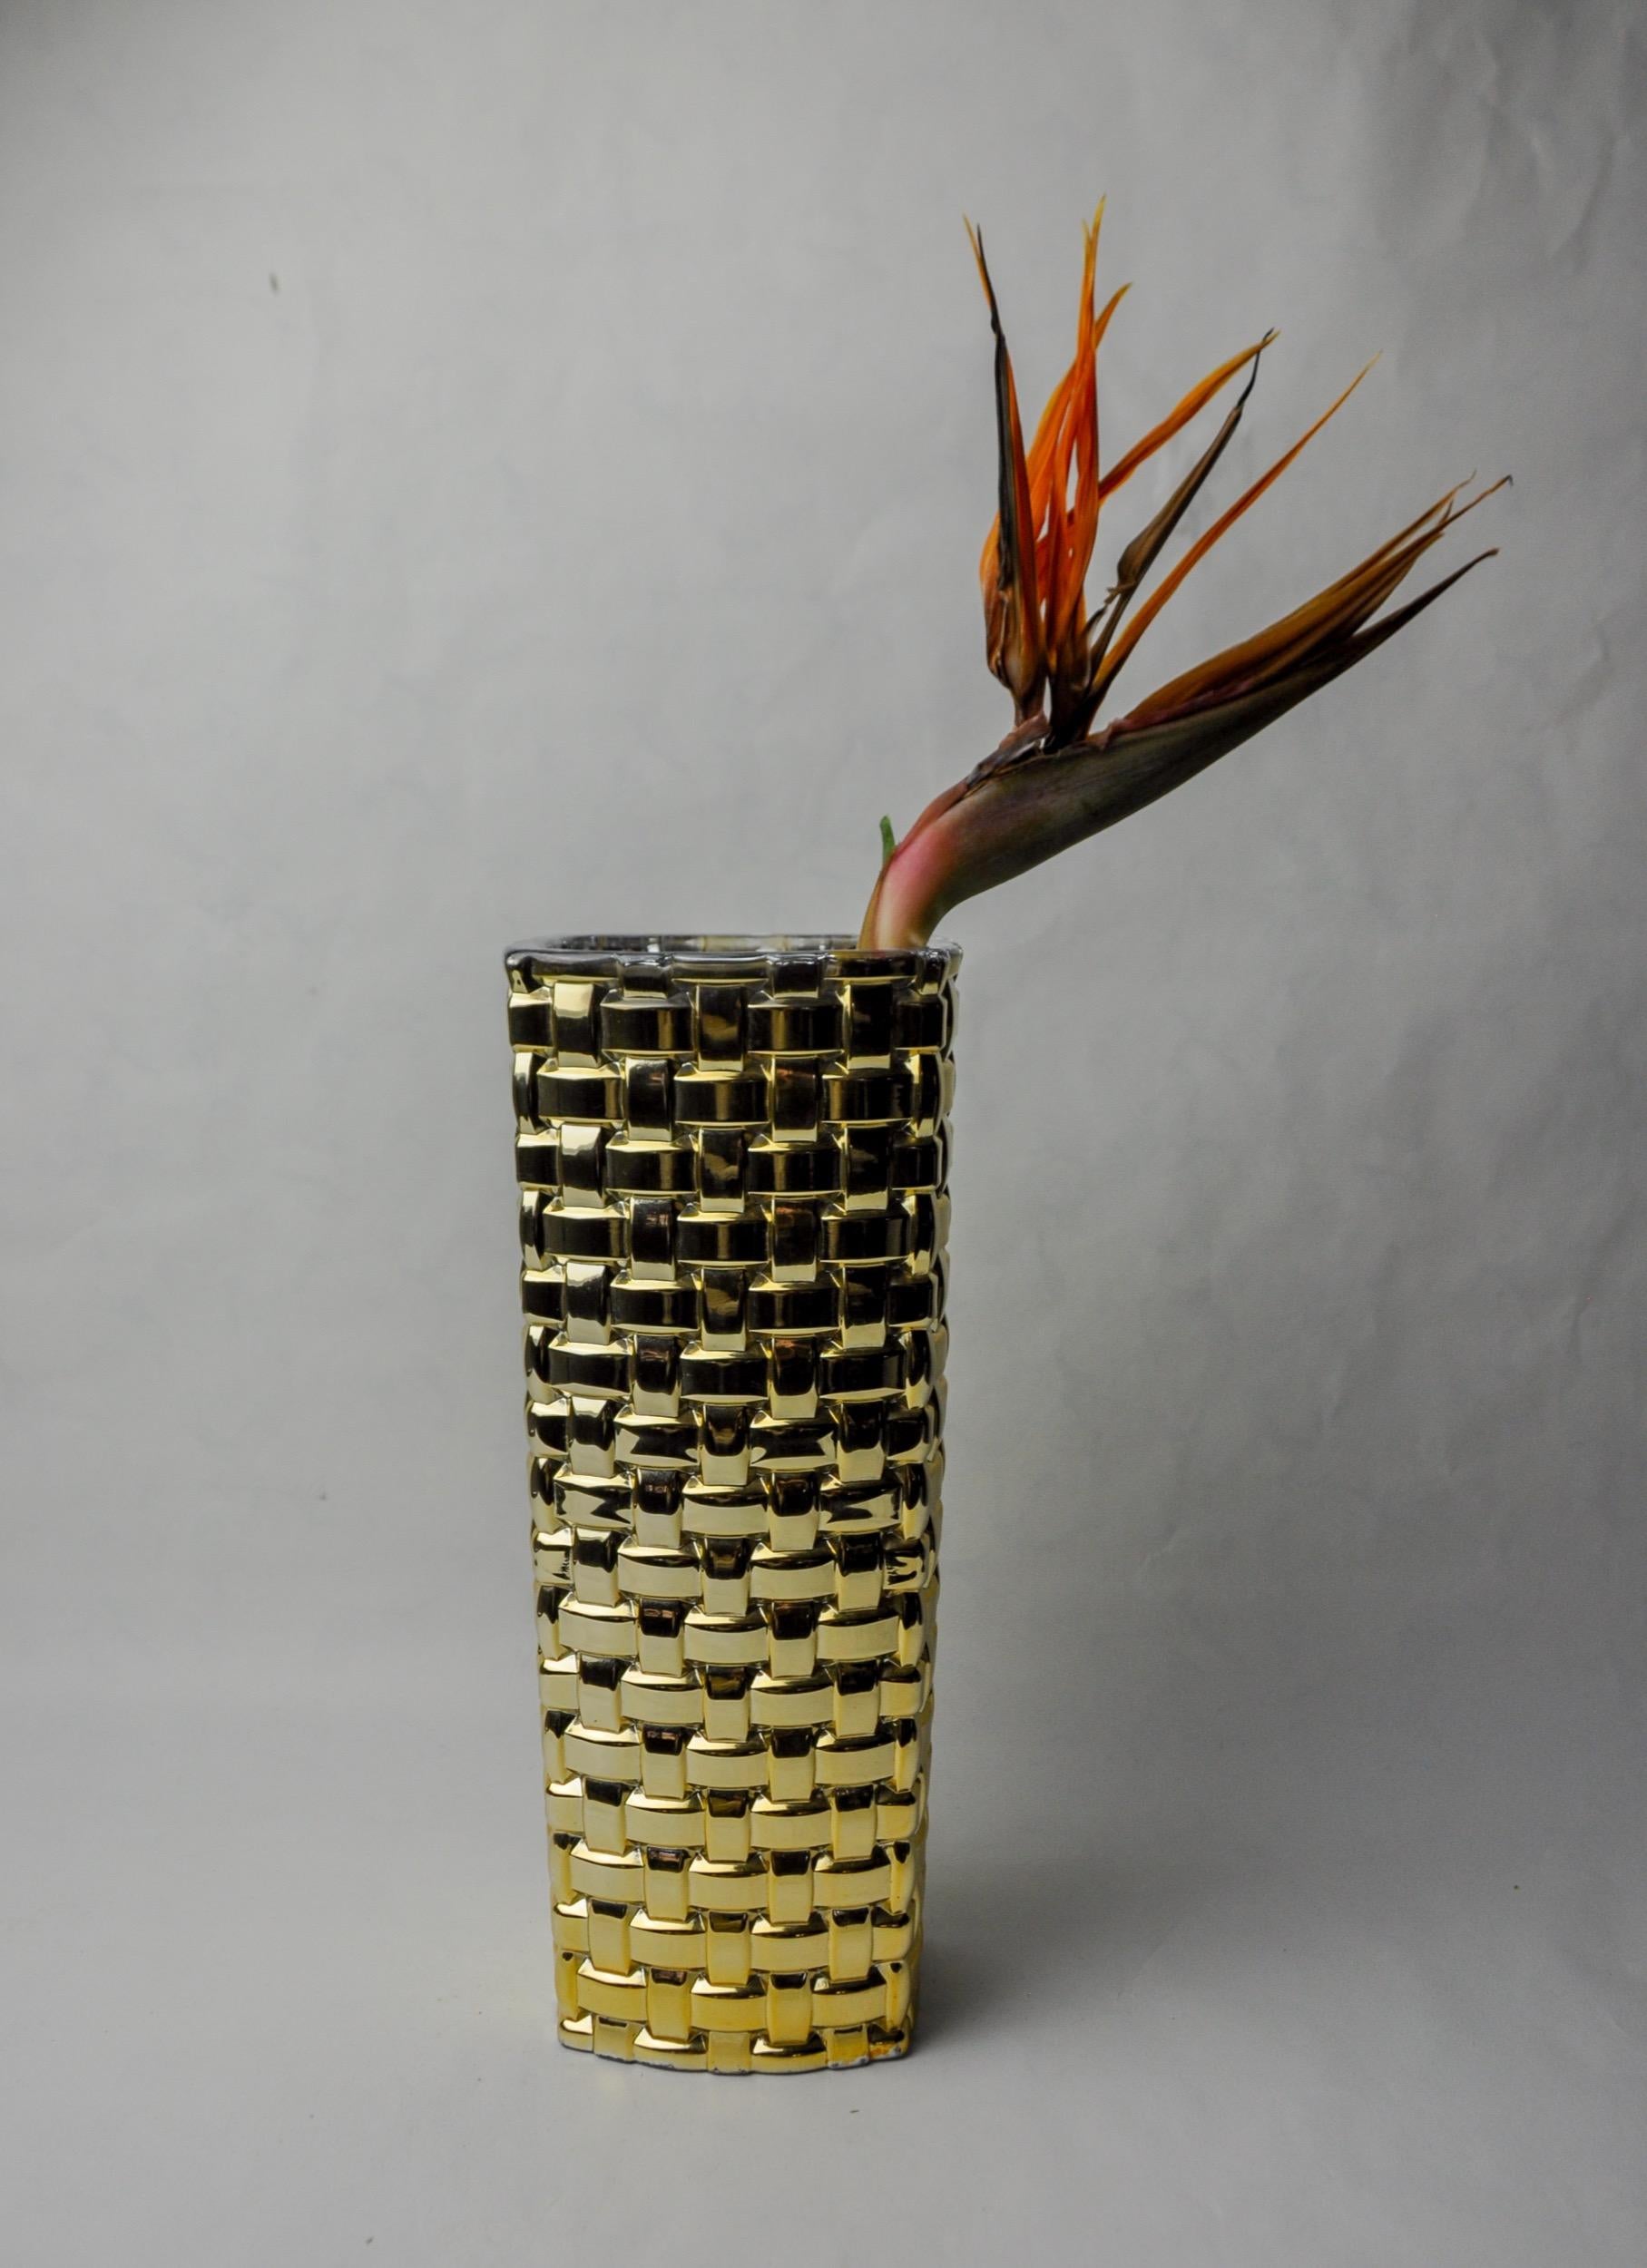 Superb and large golden bamboo effect glass vase designed and produced by Nachtmann in Germany in the 1980s. Very beautiful decorative object. Perfect state of conservation without missing or chipping. Ref: 1197.